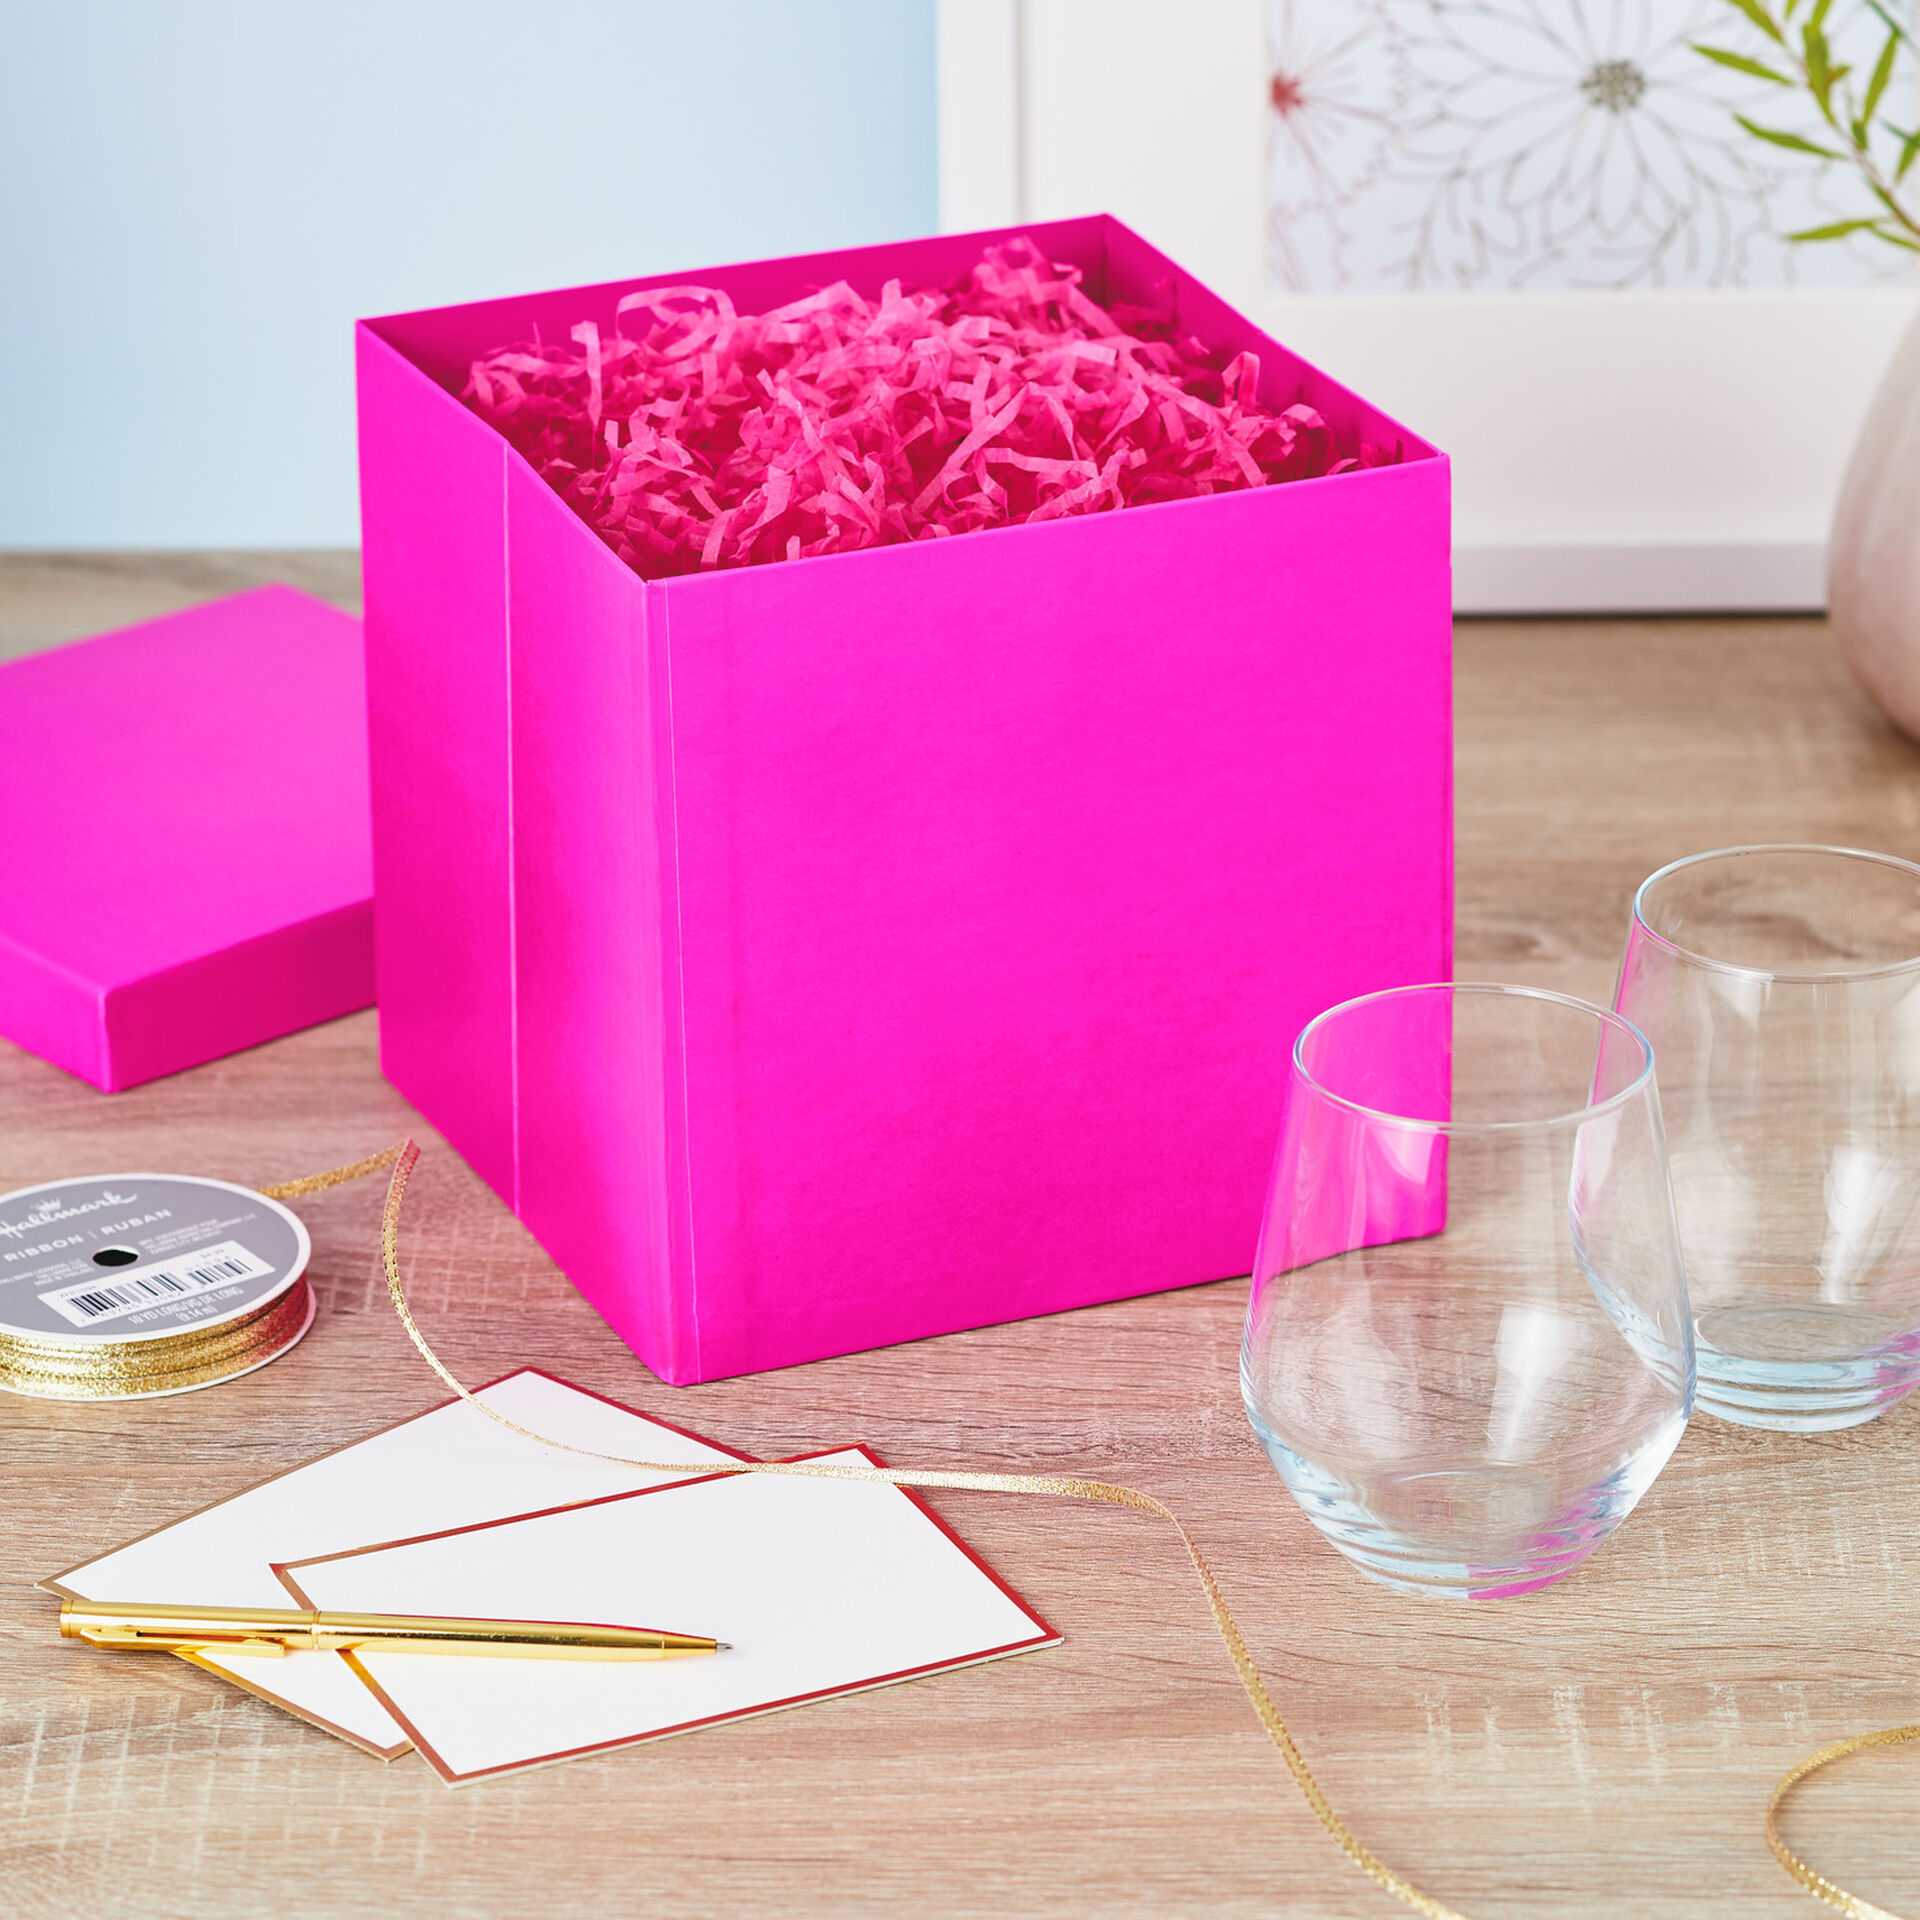 7.1" Square Hot Pink Gift Box With Shredded Paper Filler - Gift Boxes